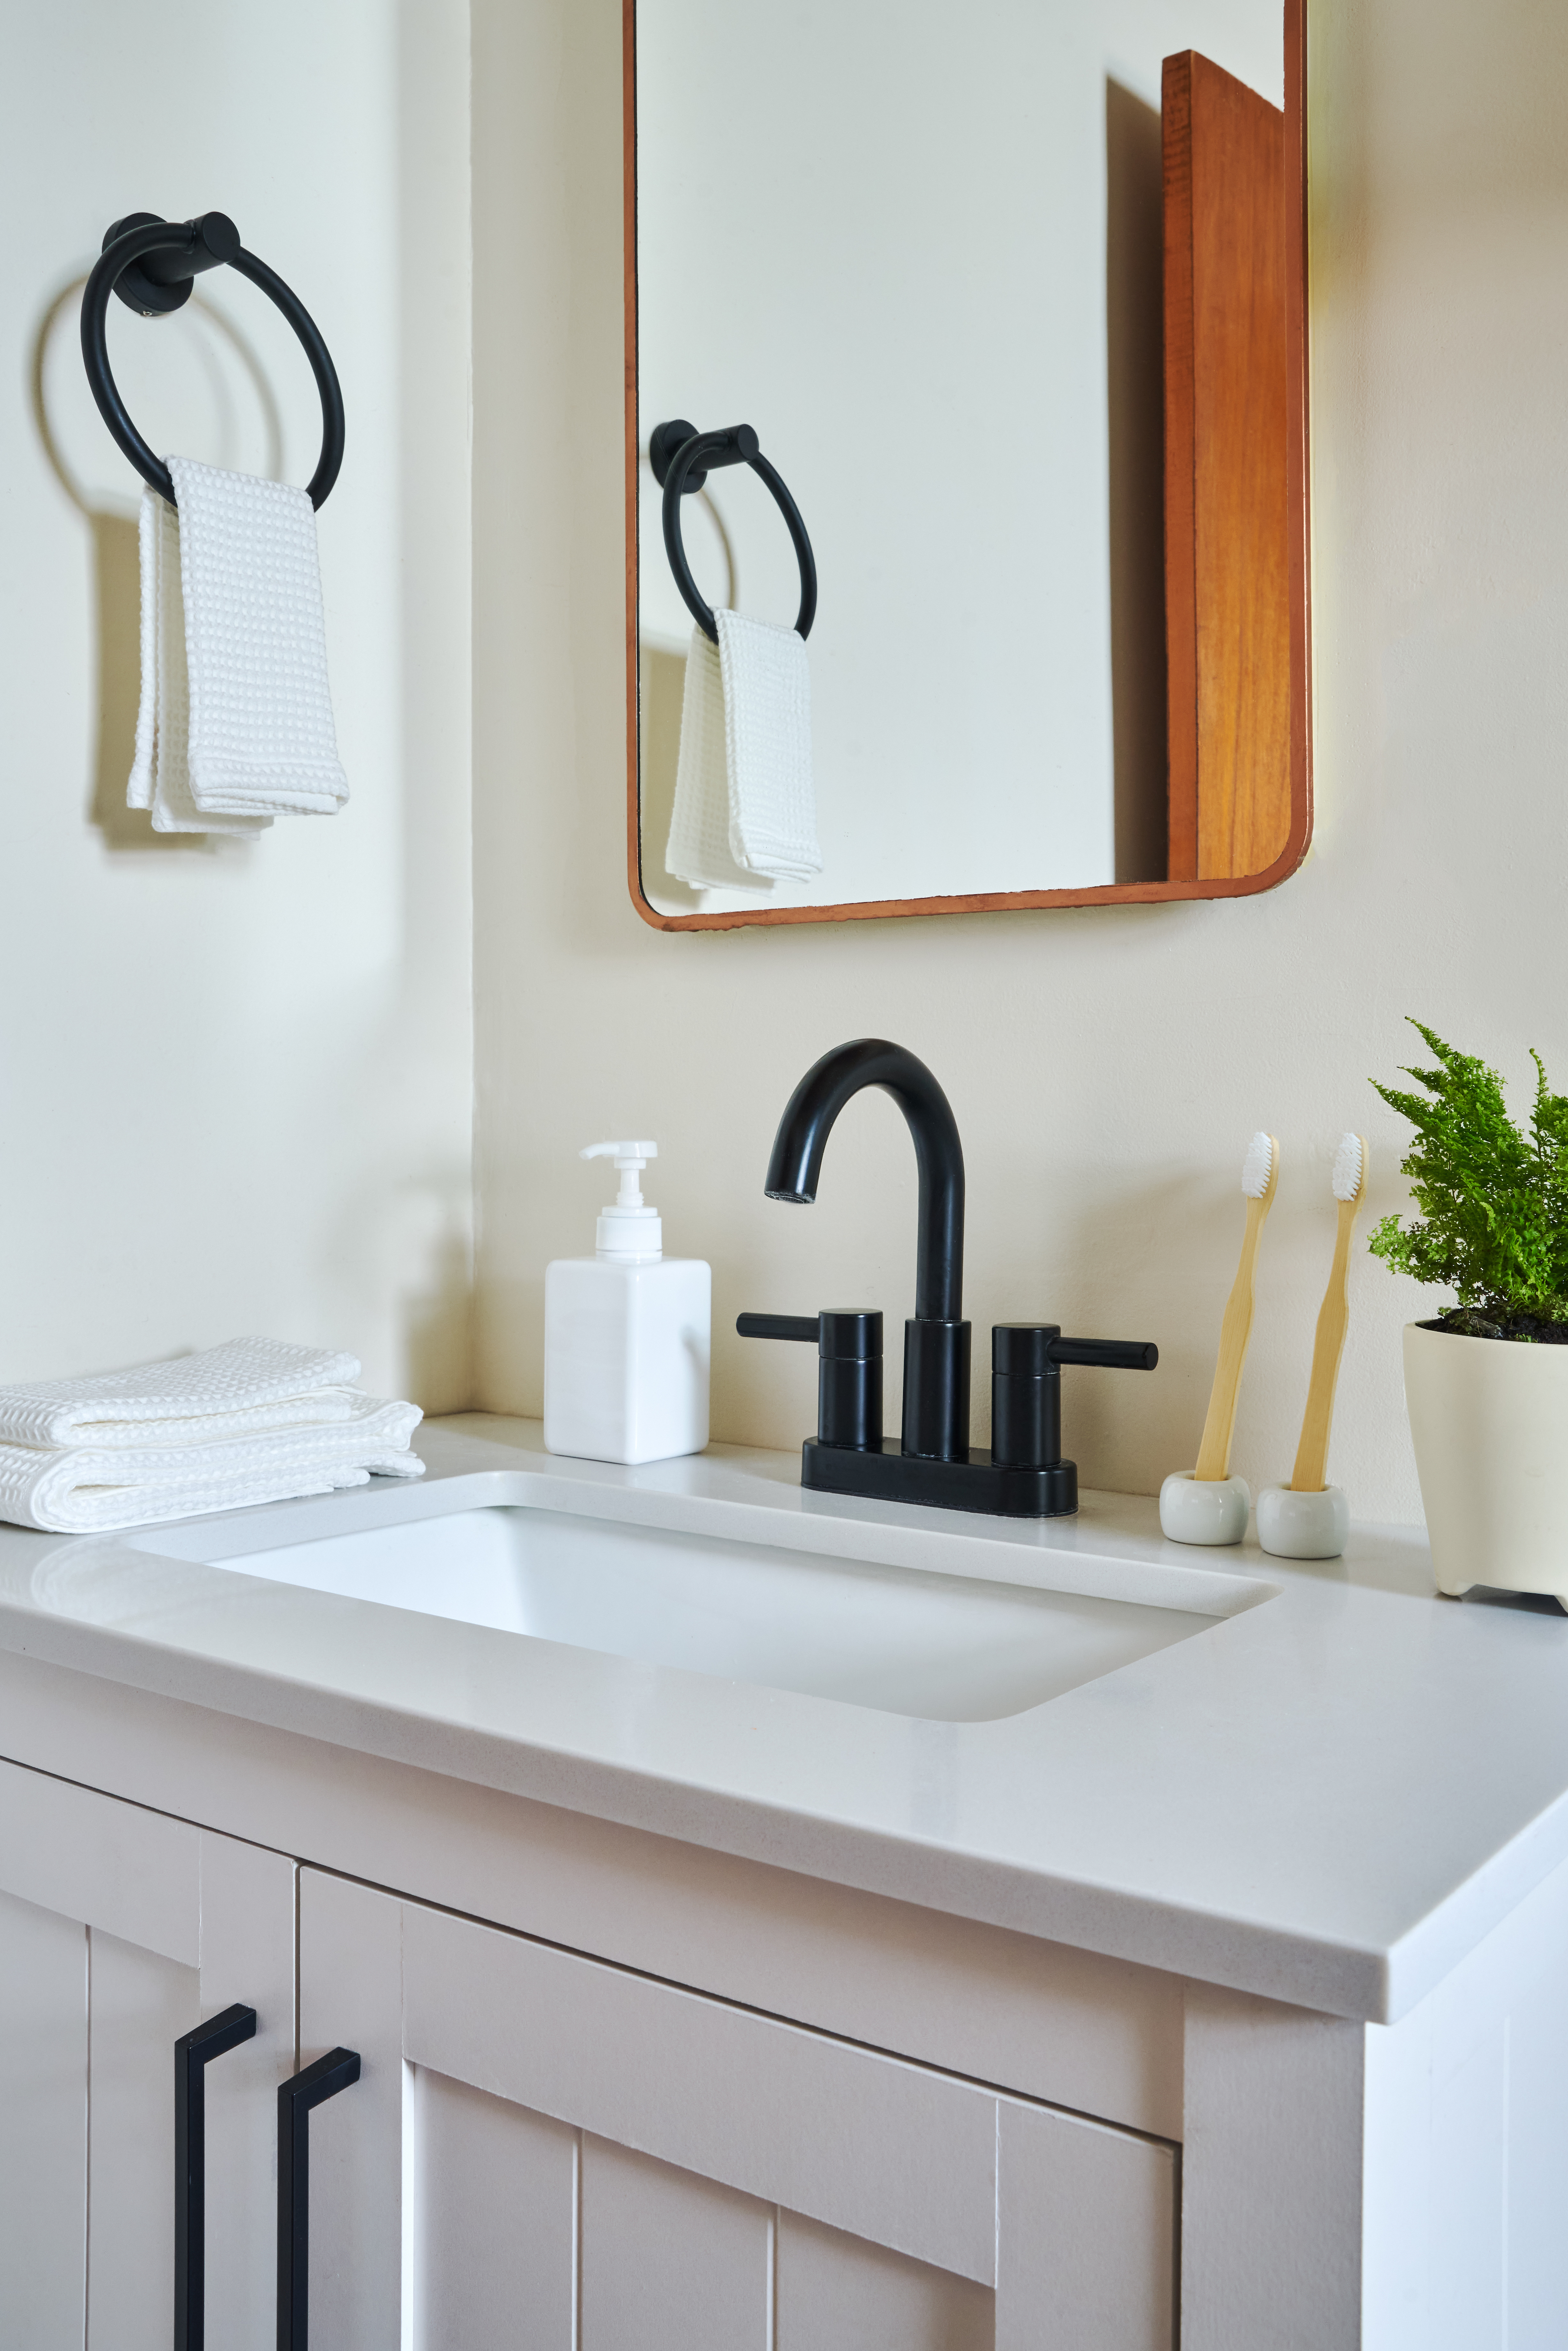 Bathroom sink with towel linens, soap dispenser, toothbrushes and stands and potted plant all included in Host starter kit.